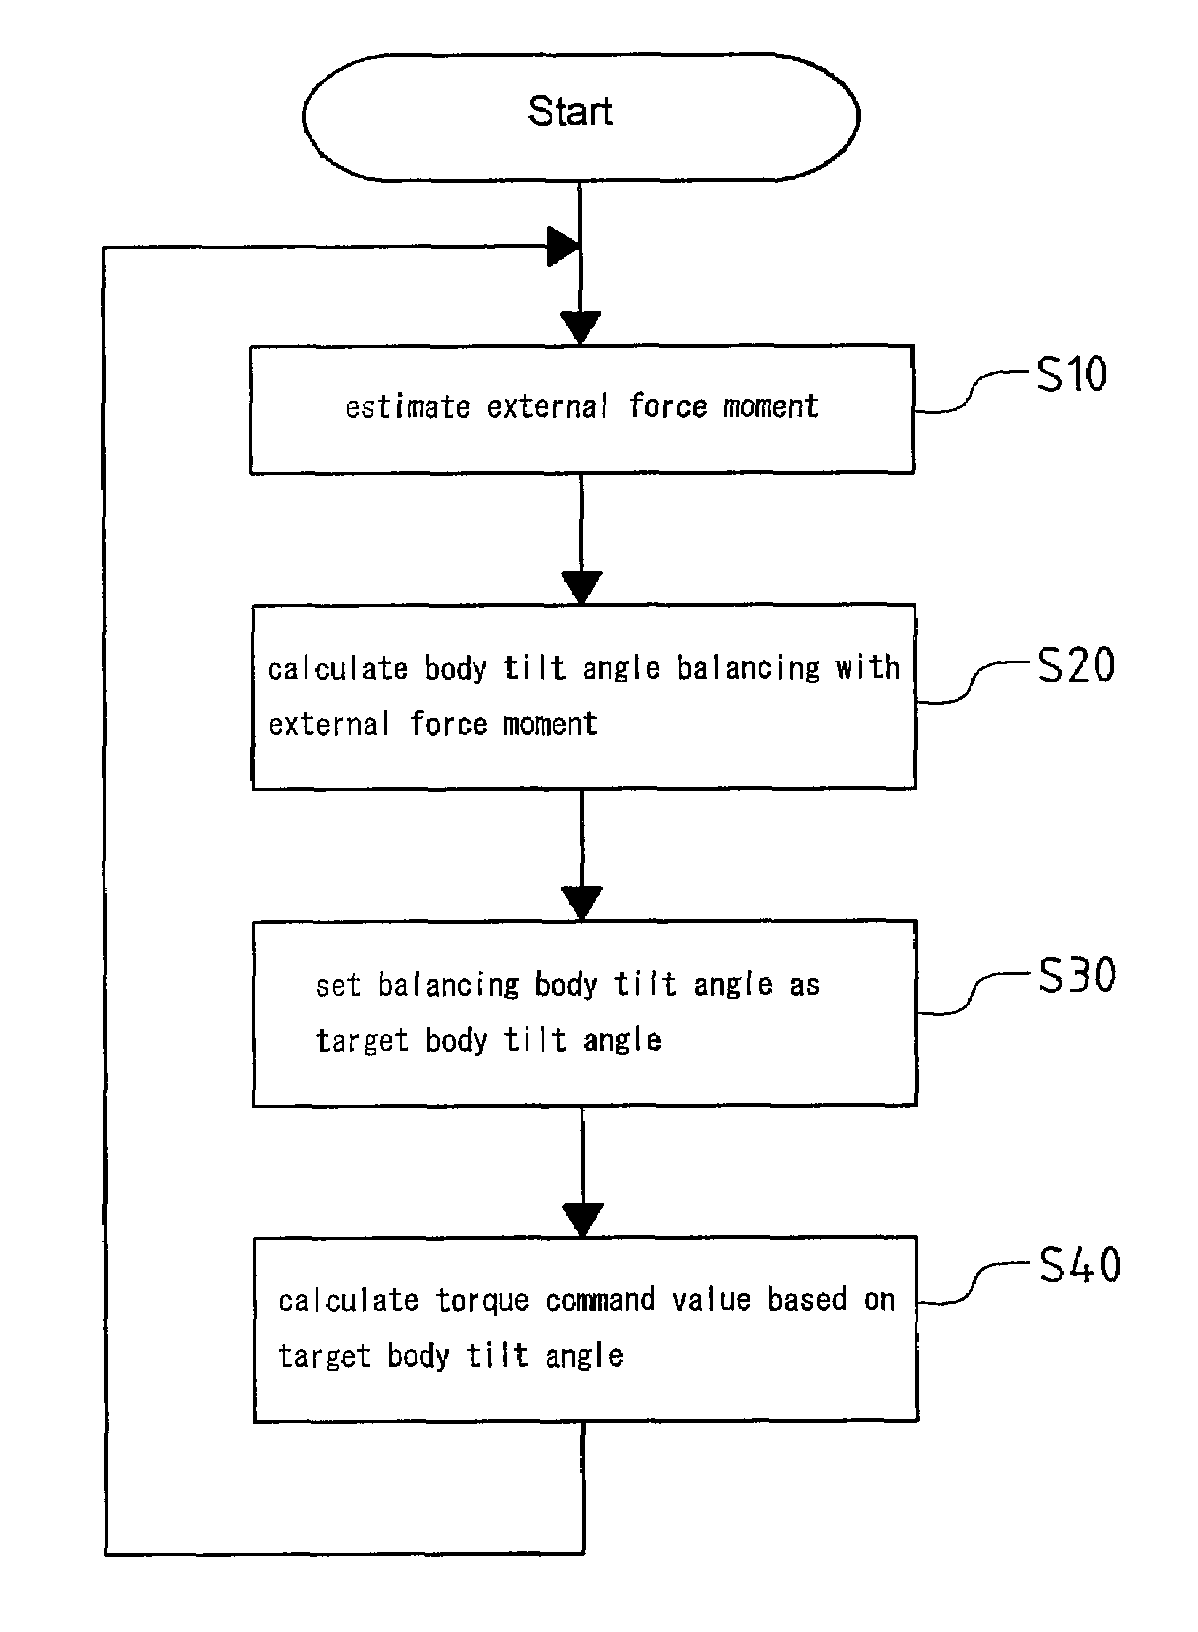 Control method of traveling dolly